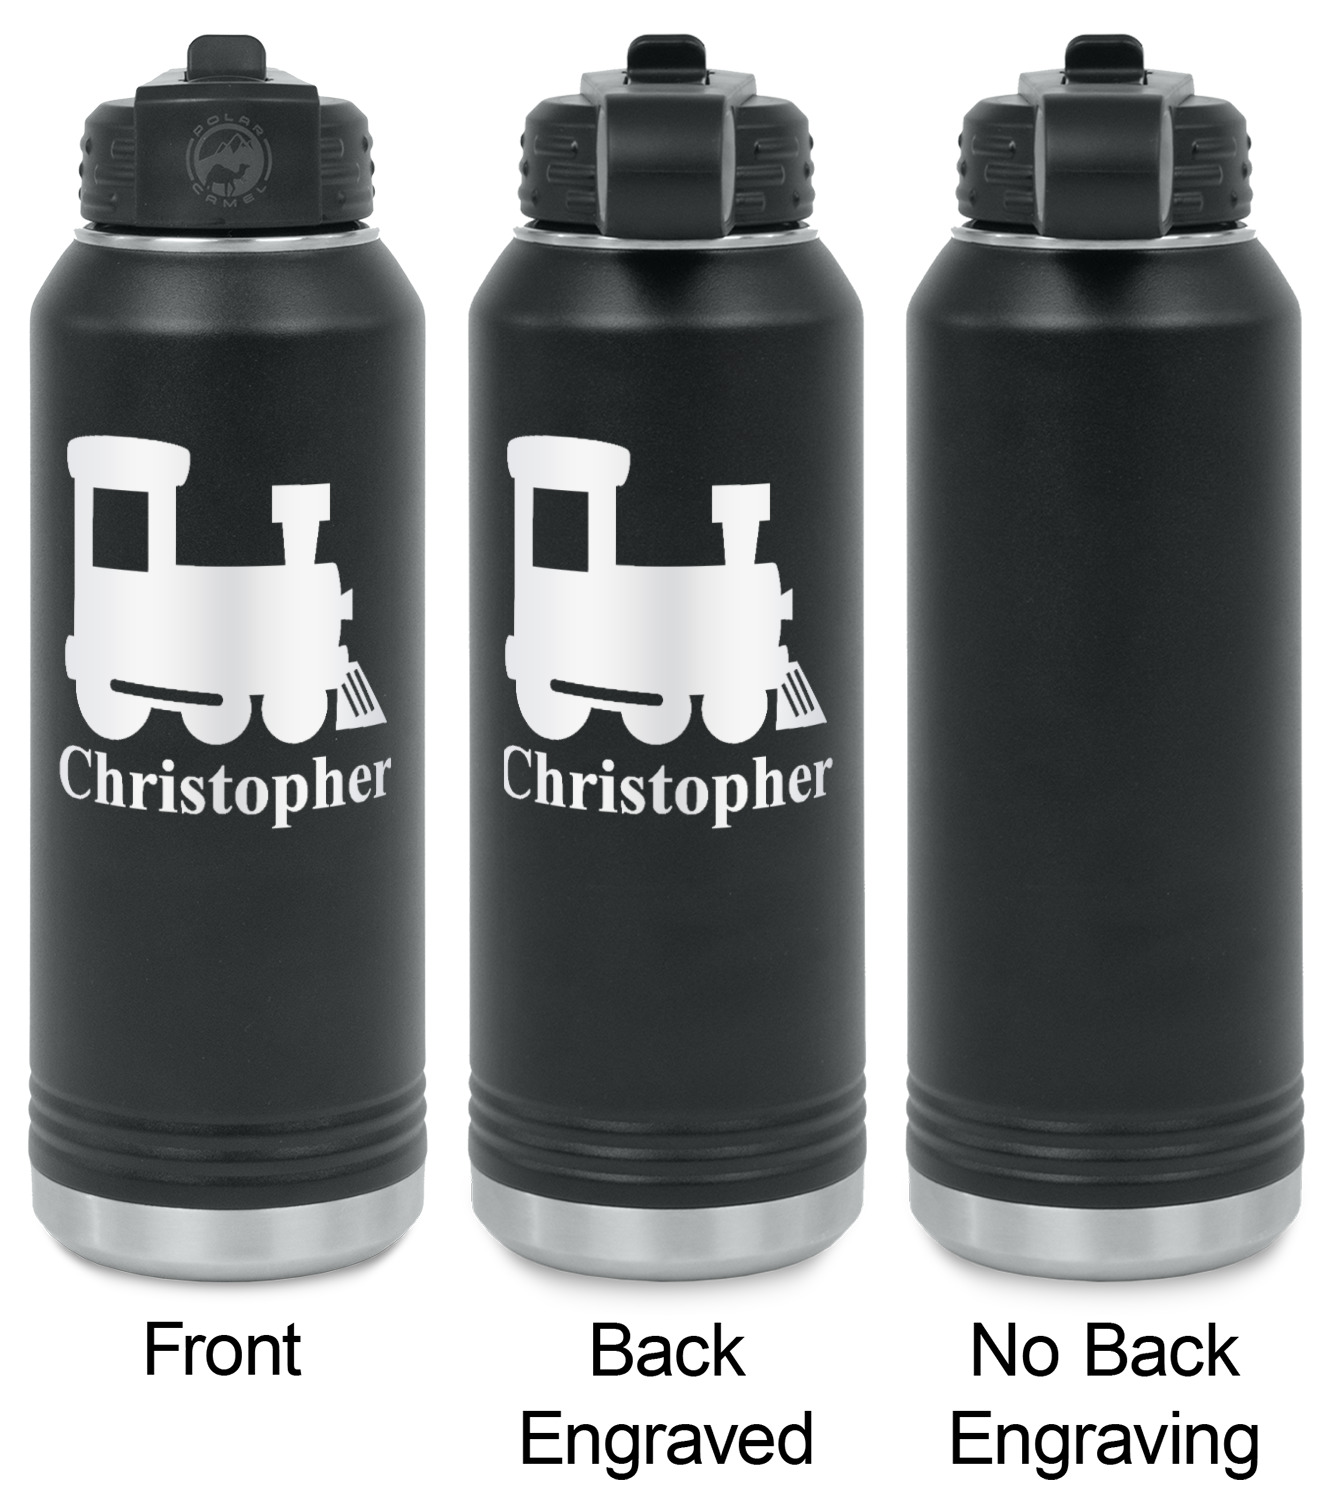 https://www.youcustomizeit.com/common/MAKE/223626/Trains-Laser-Engraved-Water-Bottles-2-Styles-Front-Back-View.jpg?lm=1666016520